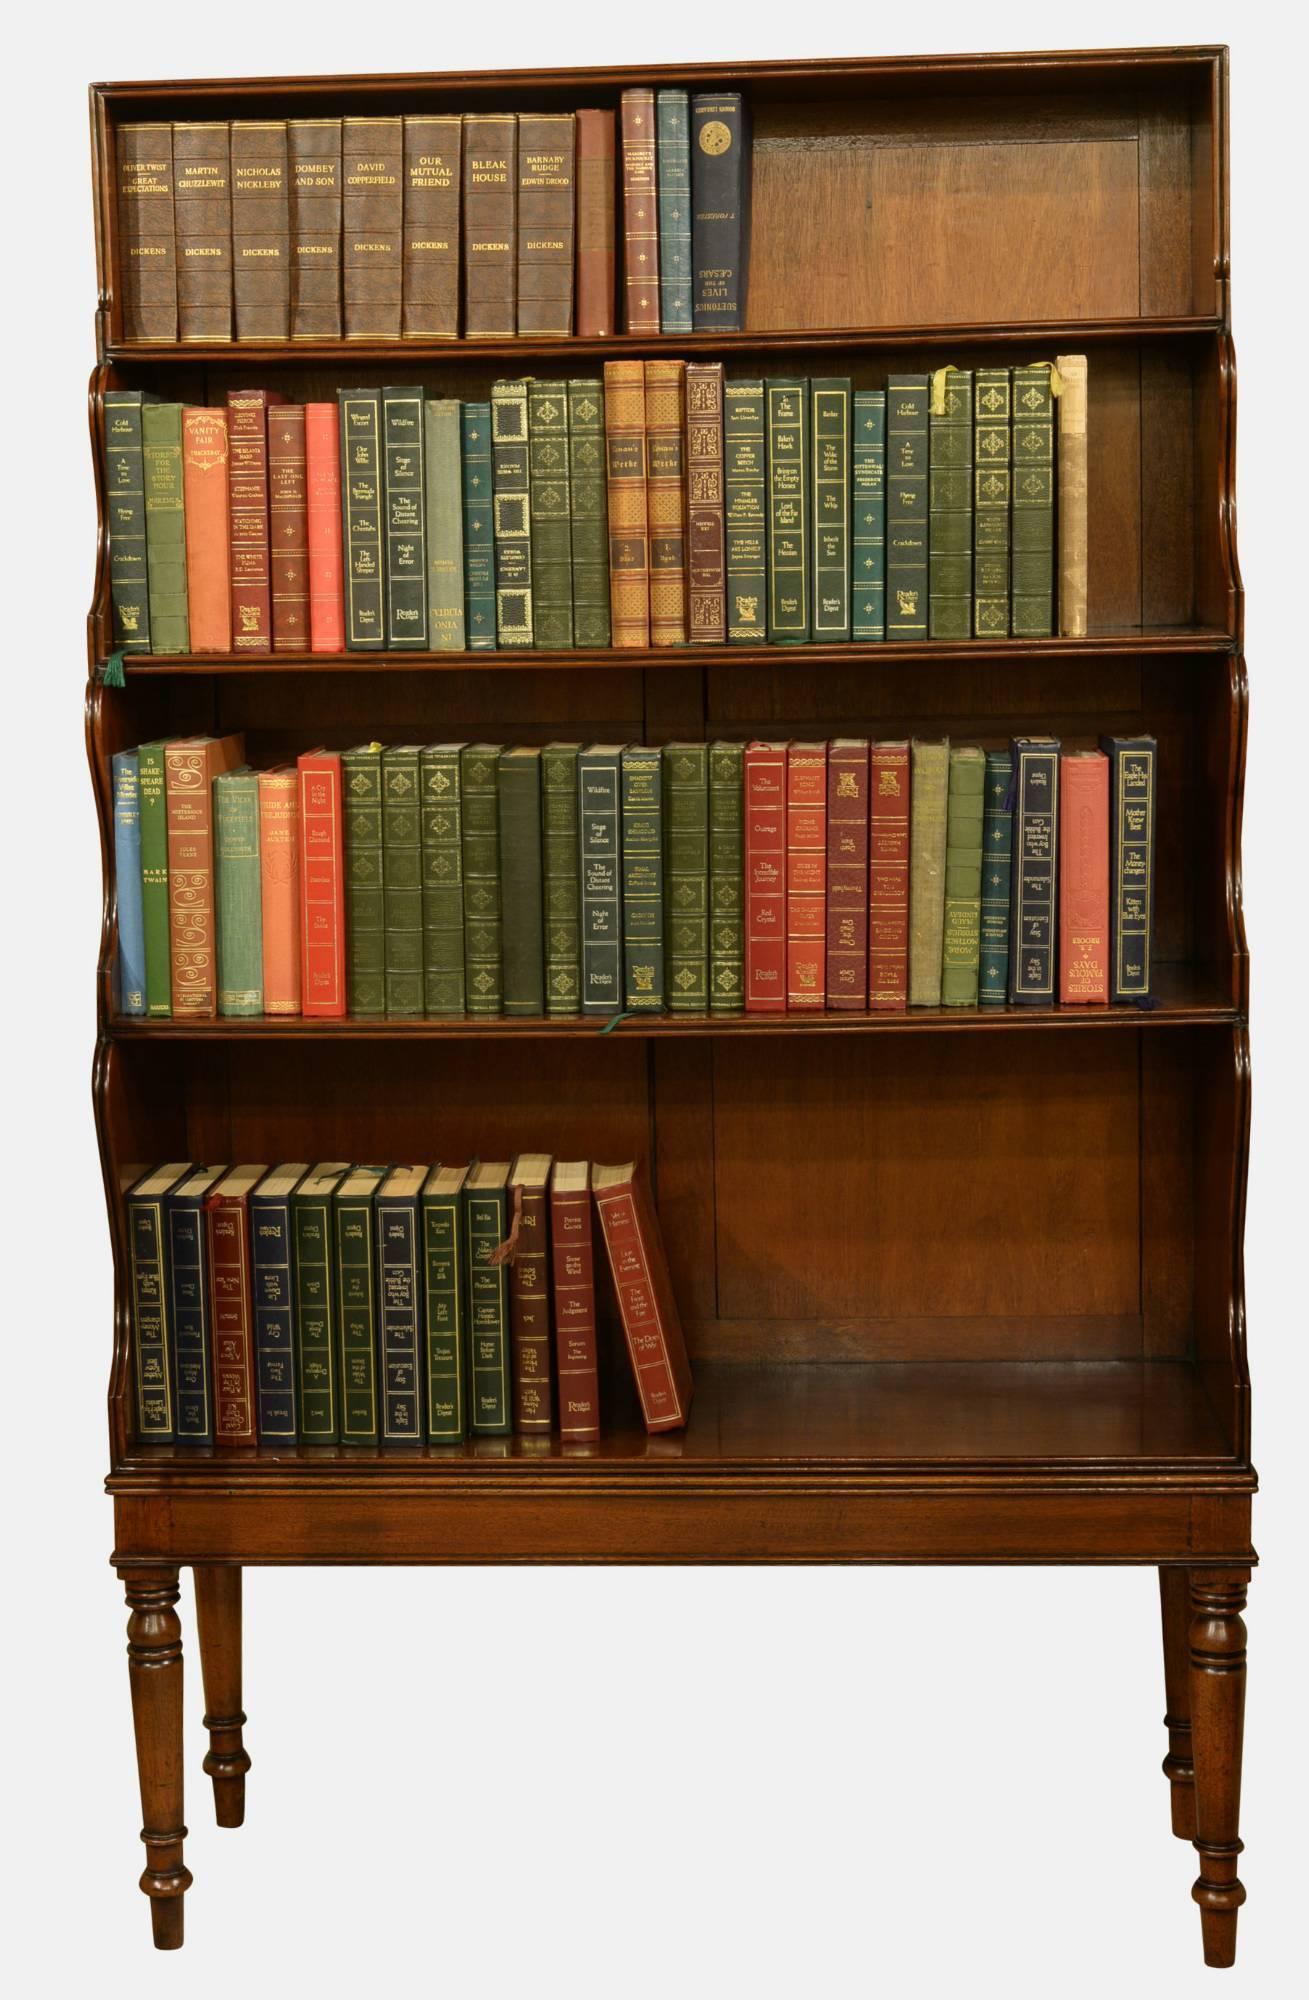 George III mahogany waterfall bookcase. Excellent timber.

circa 1800.